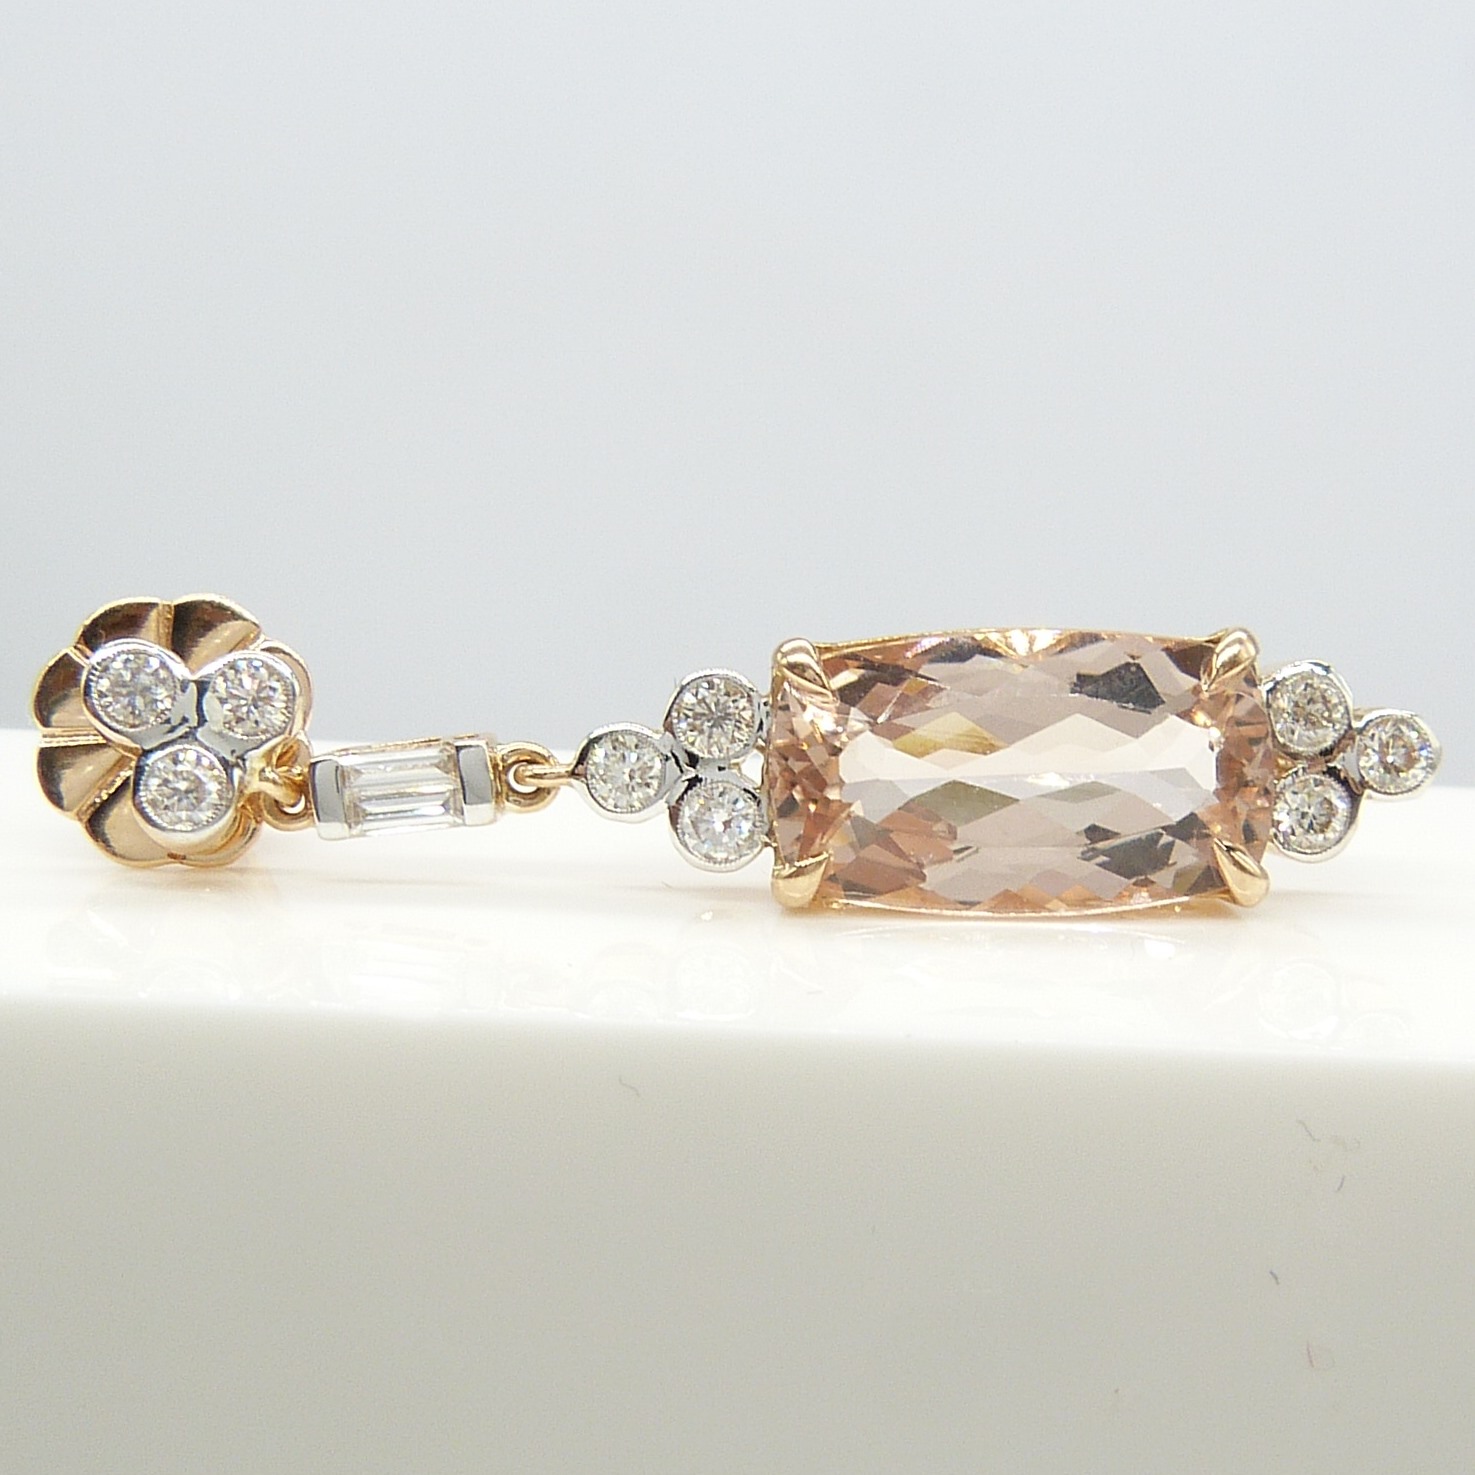 A fine quality pair of checkerboard cushion-cut morganite and diamond drop earrings in rose gold - Image 3 of 12